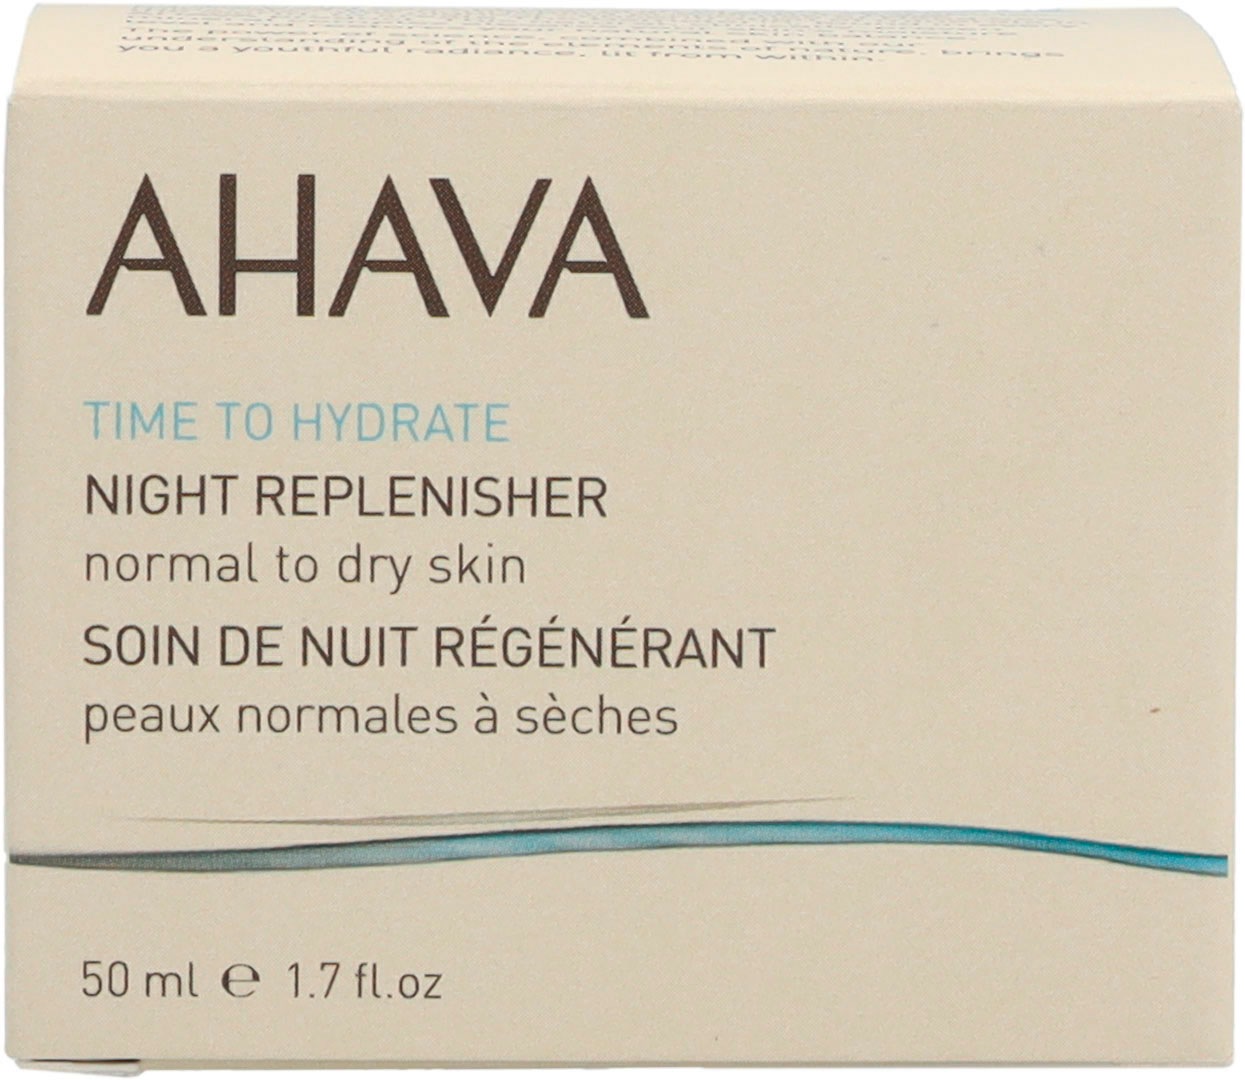 AHAVA Nachtcreme To Dry« »Time Replenisher Hydrate Normal Night